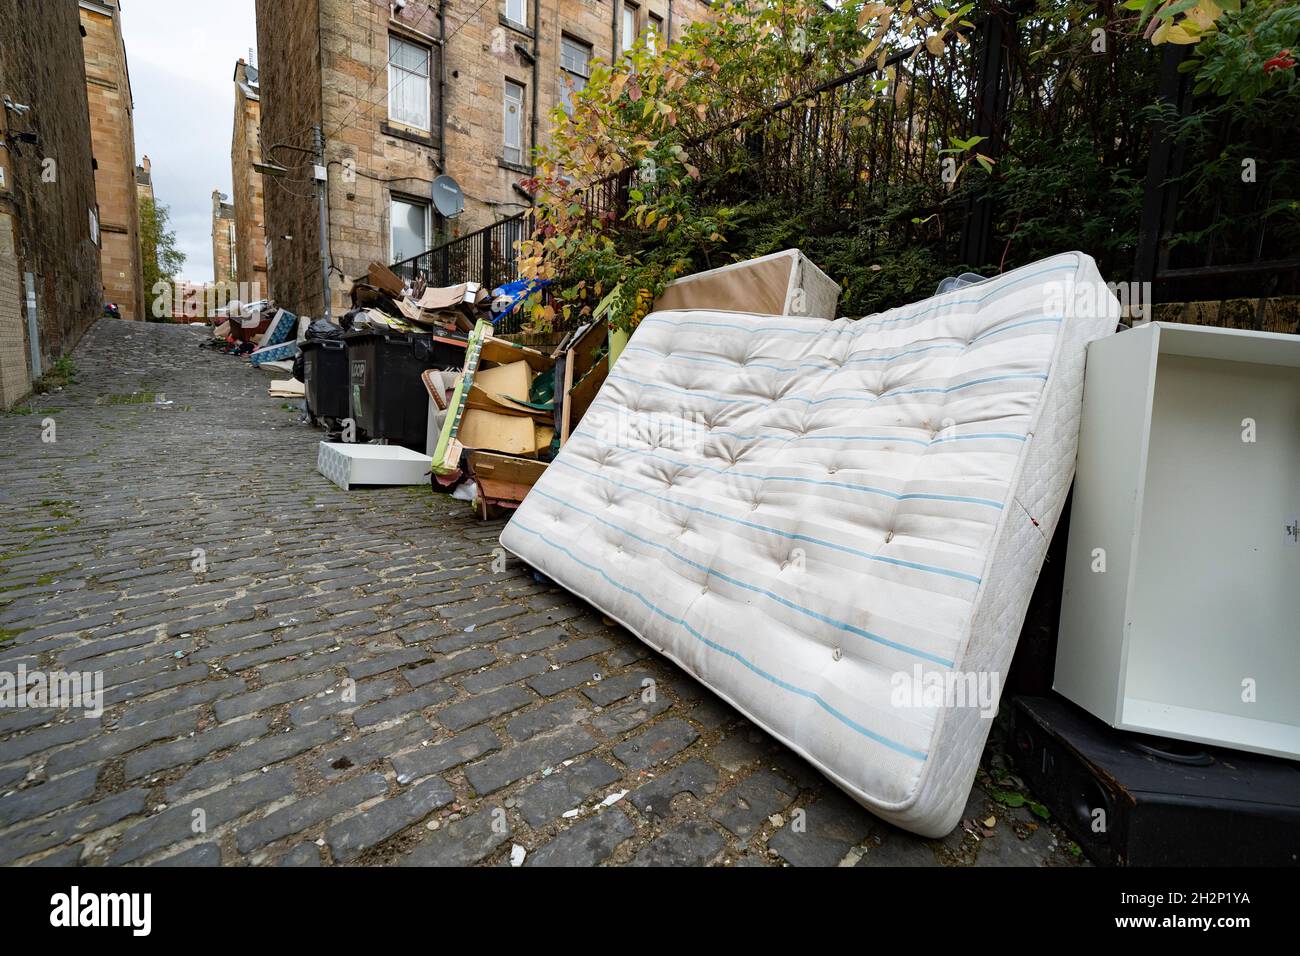 Glasgow, Scotland, UK. 23rd October 2021. Domestic waste is seen discarded in the streets of Govanhill in Glasgow with one week to the start of the UN Climate Change Conference COP26 in the city. City refuse collectors have said they will strike during the conference leading to fears that the city streets will be full of rubbish while in the world’s spotlight.  Iain Masterton/Alamy Live News. Stock Photo